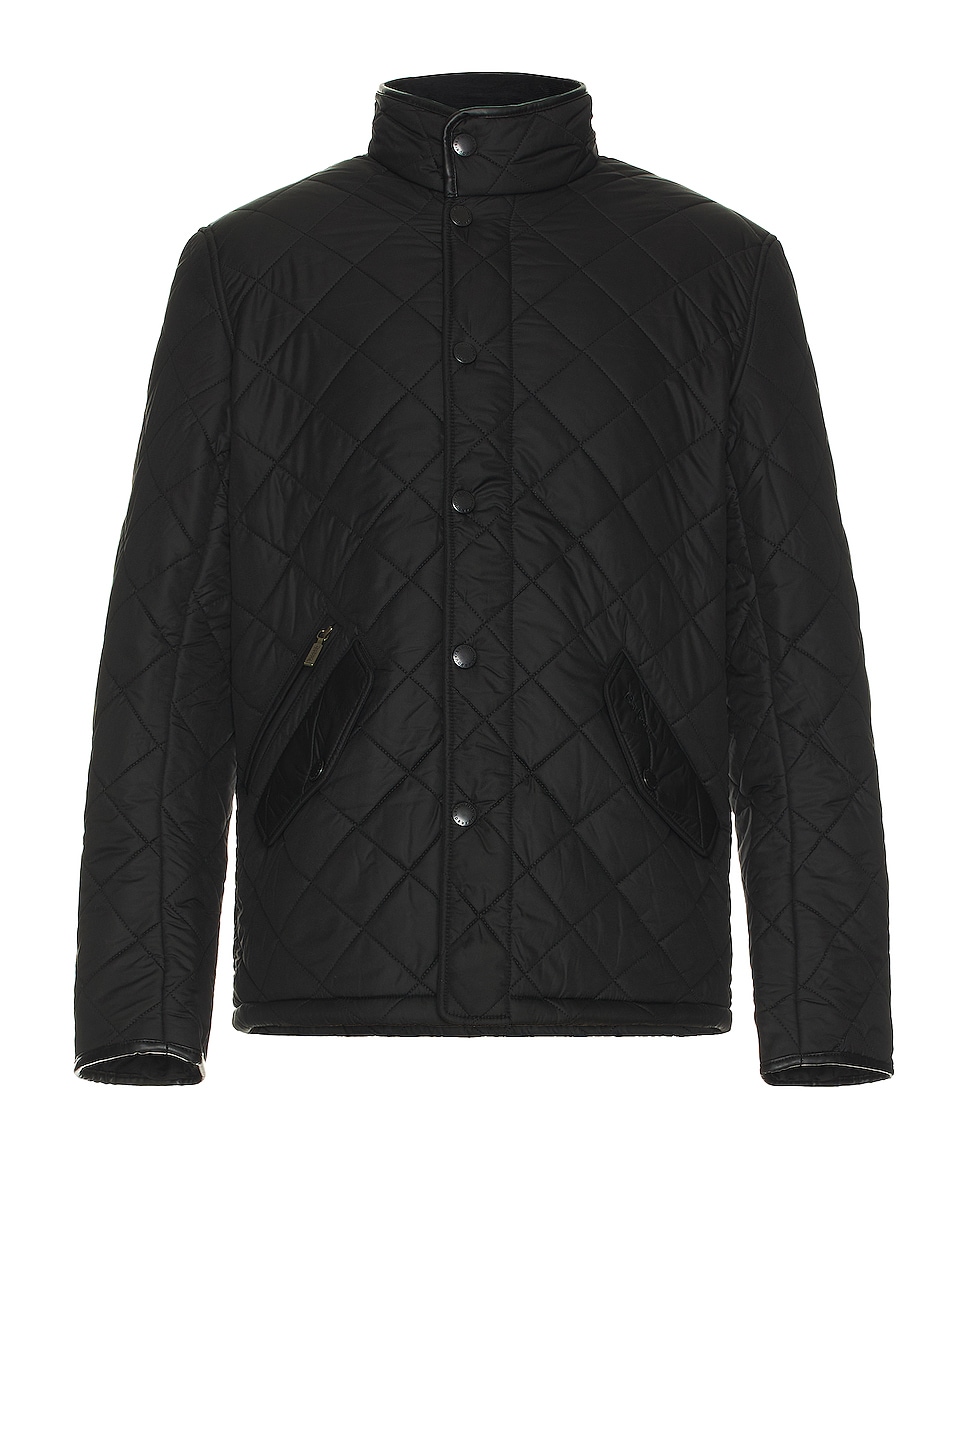 Image 1 of Barbour Powell Quilt Jacket in Black